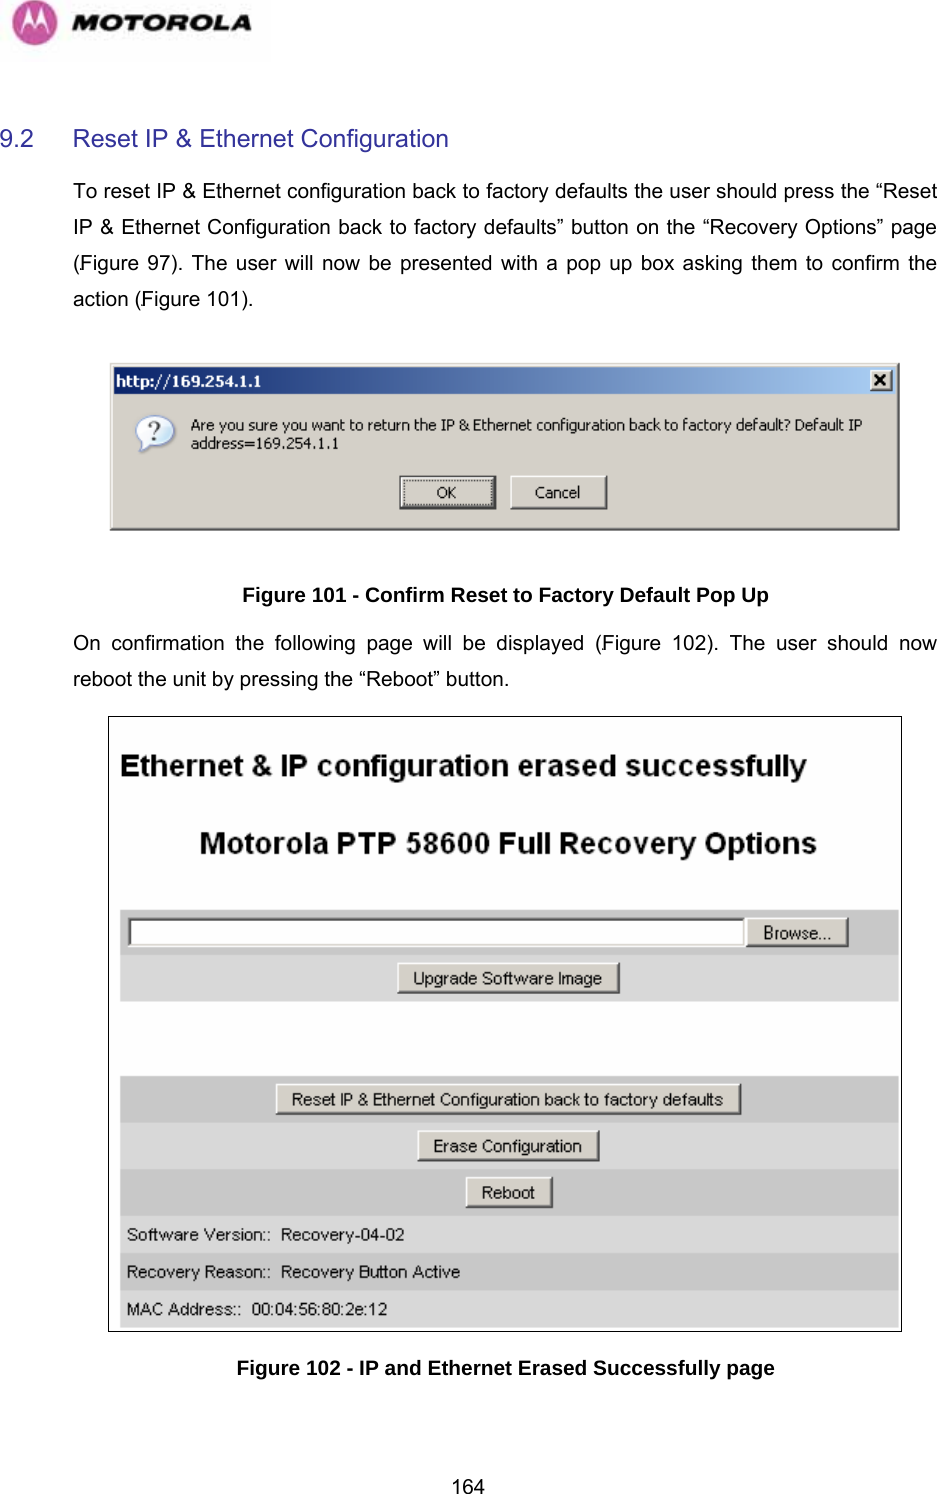   1649.2  Reset IP &amp; Ethernet Configuration To reset IP &amp; Ethernet configuration back to factory defaults the user should press the “Reset IP &amp; Ethernet Configuration back to factory defaults” button on the “Recovery Options” page (1163H1164HFigure 97). The user will now be presented with a pop up box asking them to confirm the action (1165HFigure 101).  Figure 101 - Confirm Reset to Factory Default Pop Up On confirmation the following page will be displayed (1166HFigure 102). The user should now reboot the unit by pressing the “Reboot” button.  Figure 102 - IP and Ethernet Erased Successfully page 